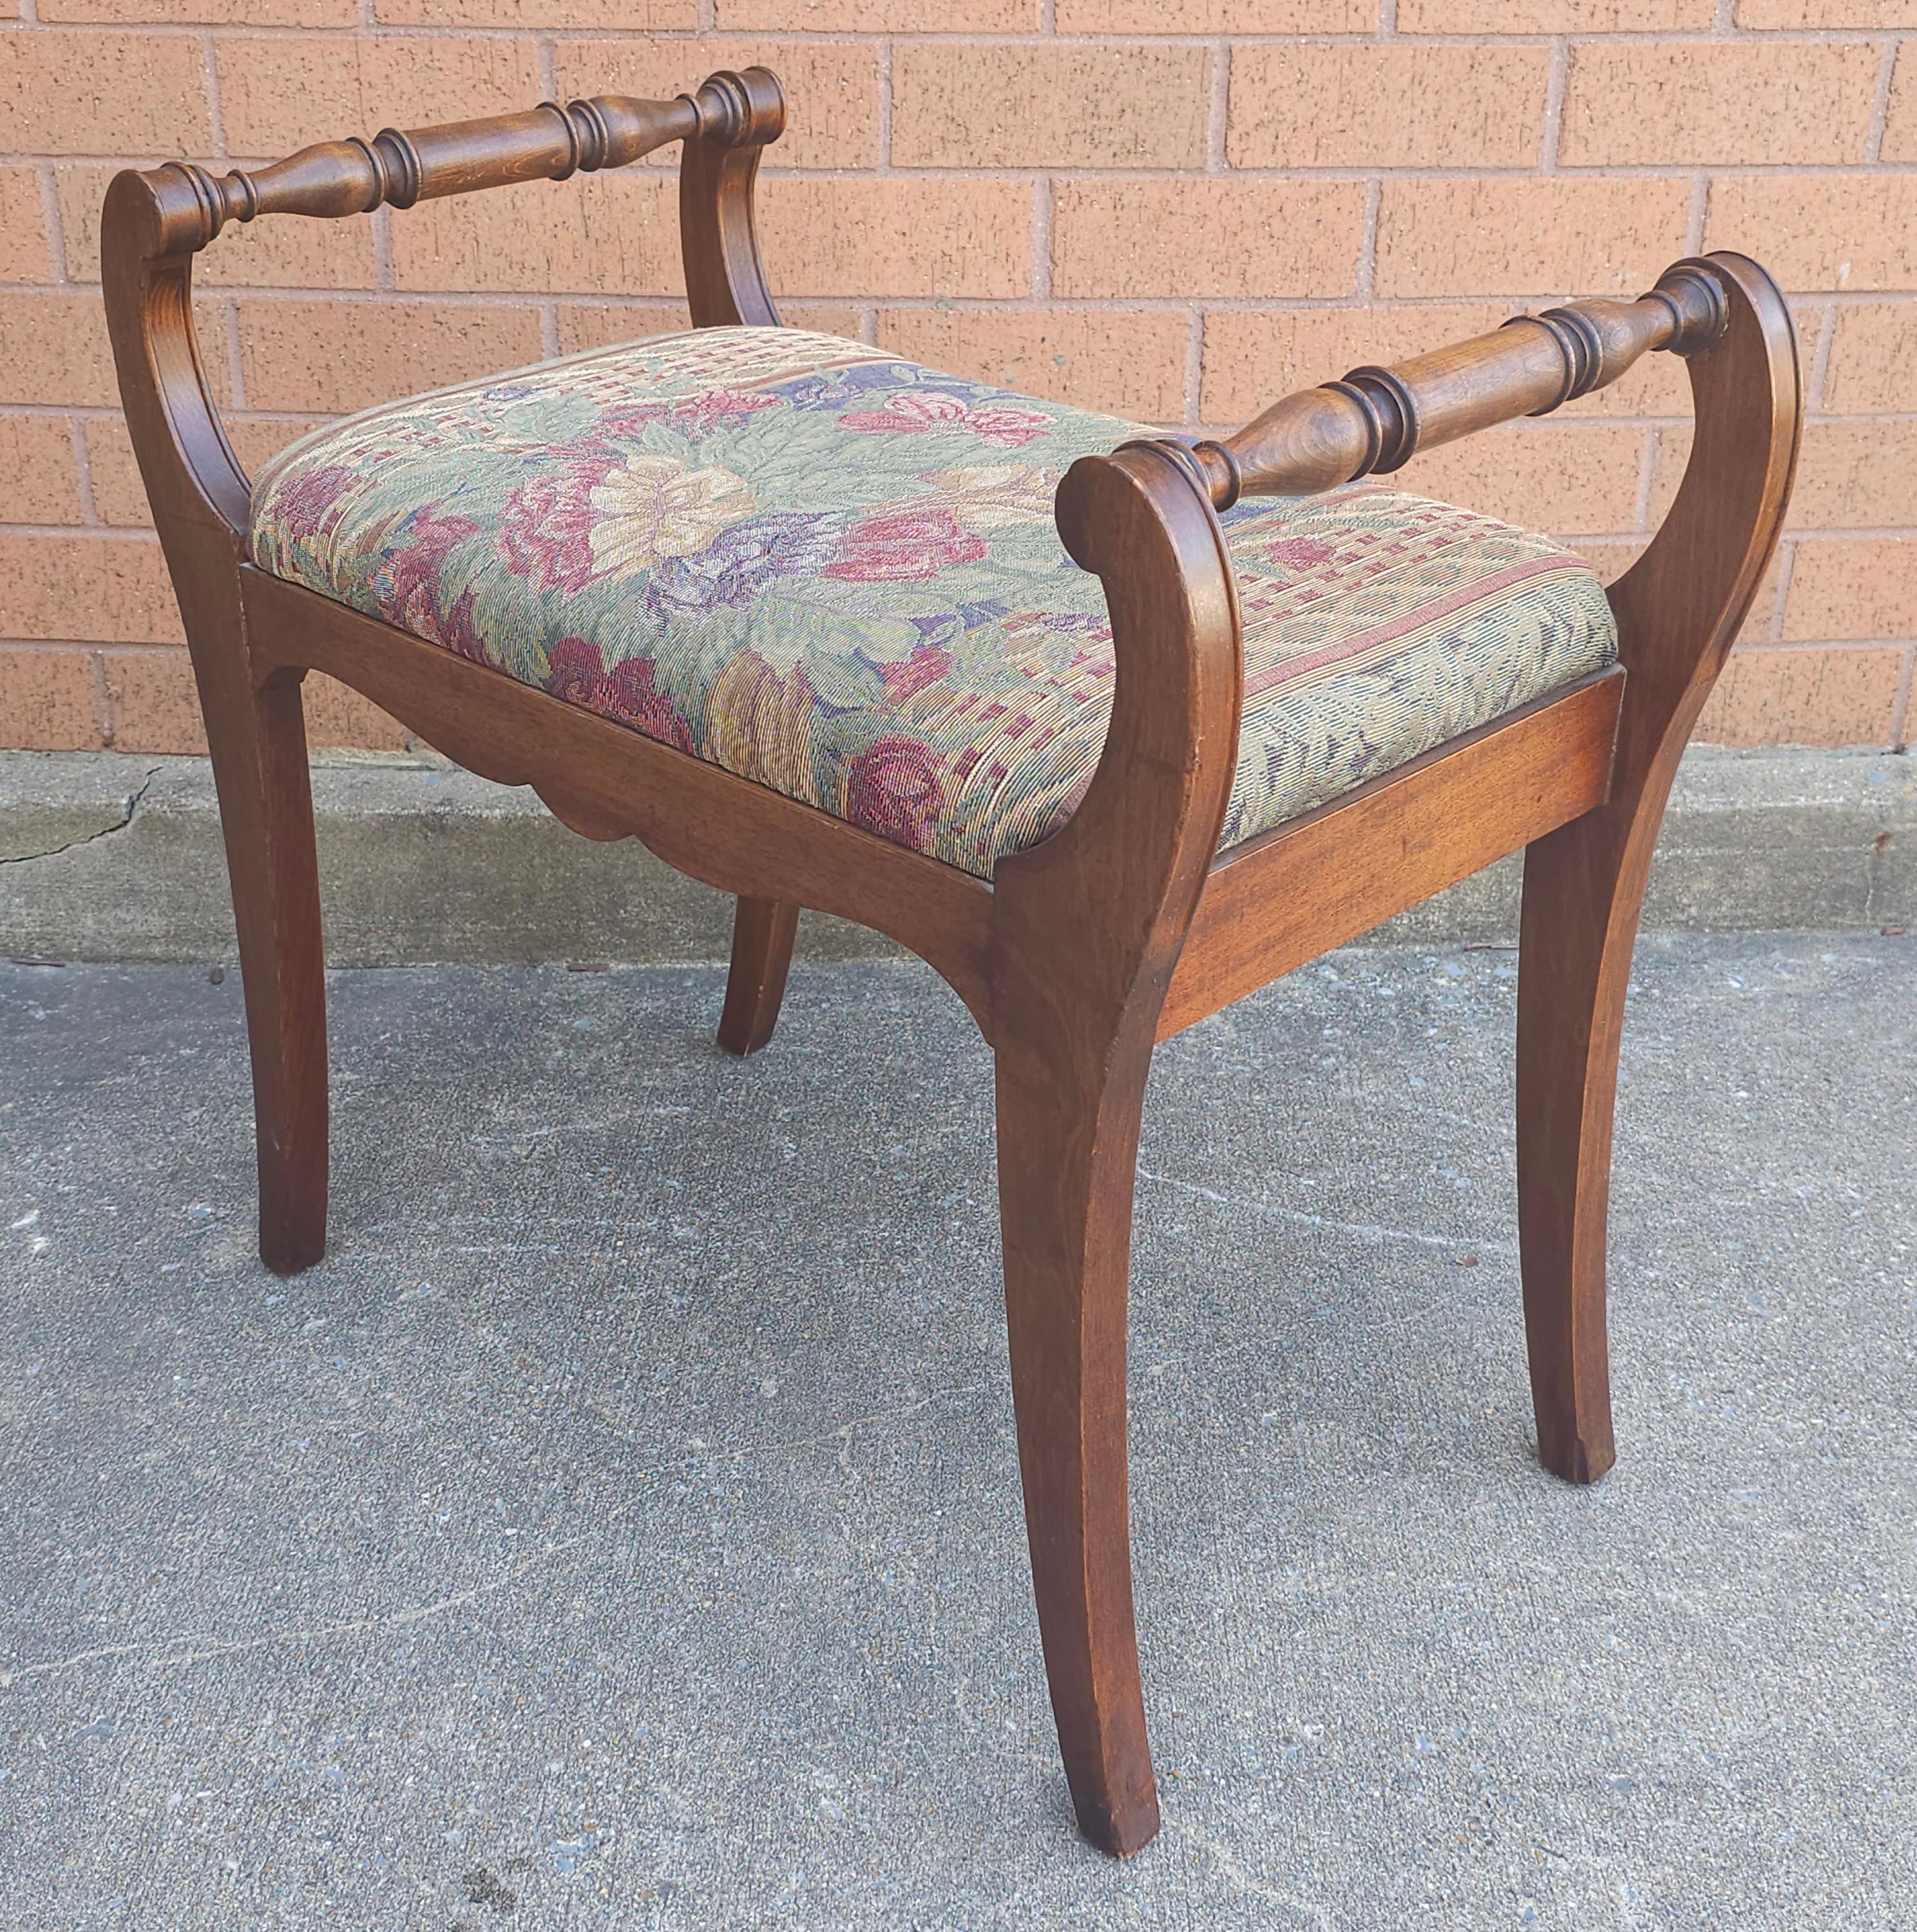 A Victorian Mahogany and Tapestry Upholstered Bench in good vintage condition. Measures 26